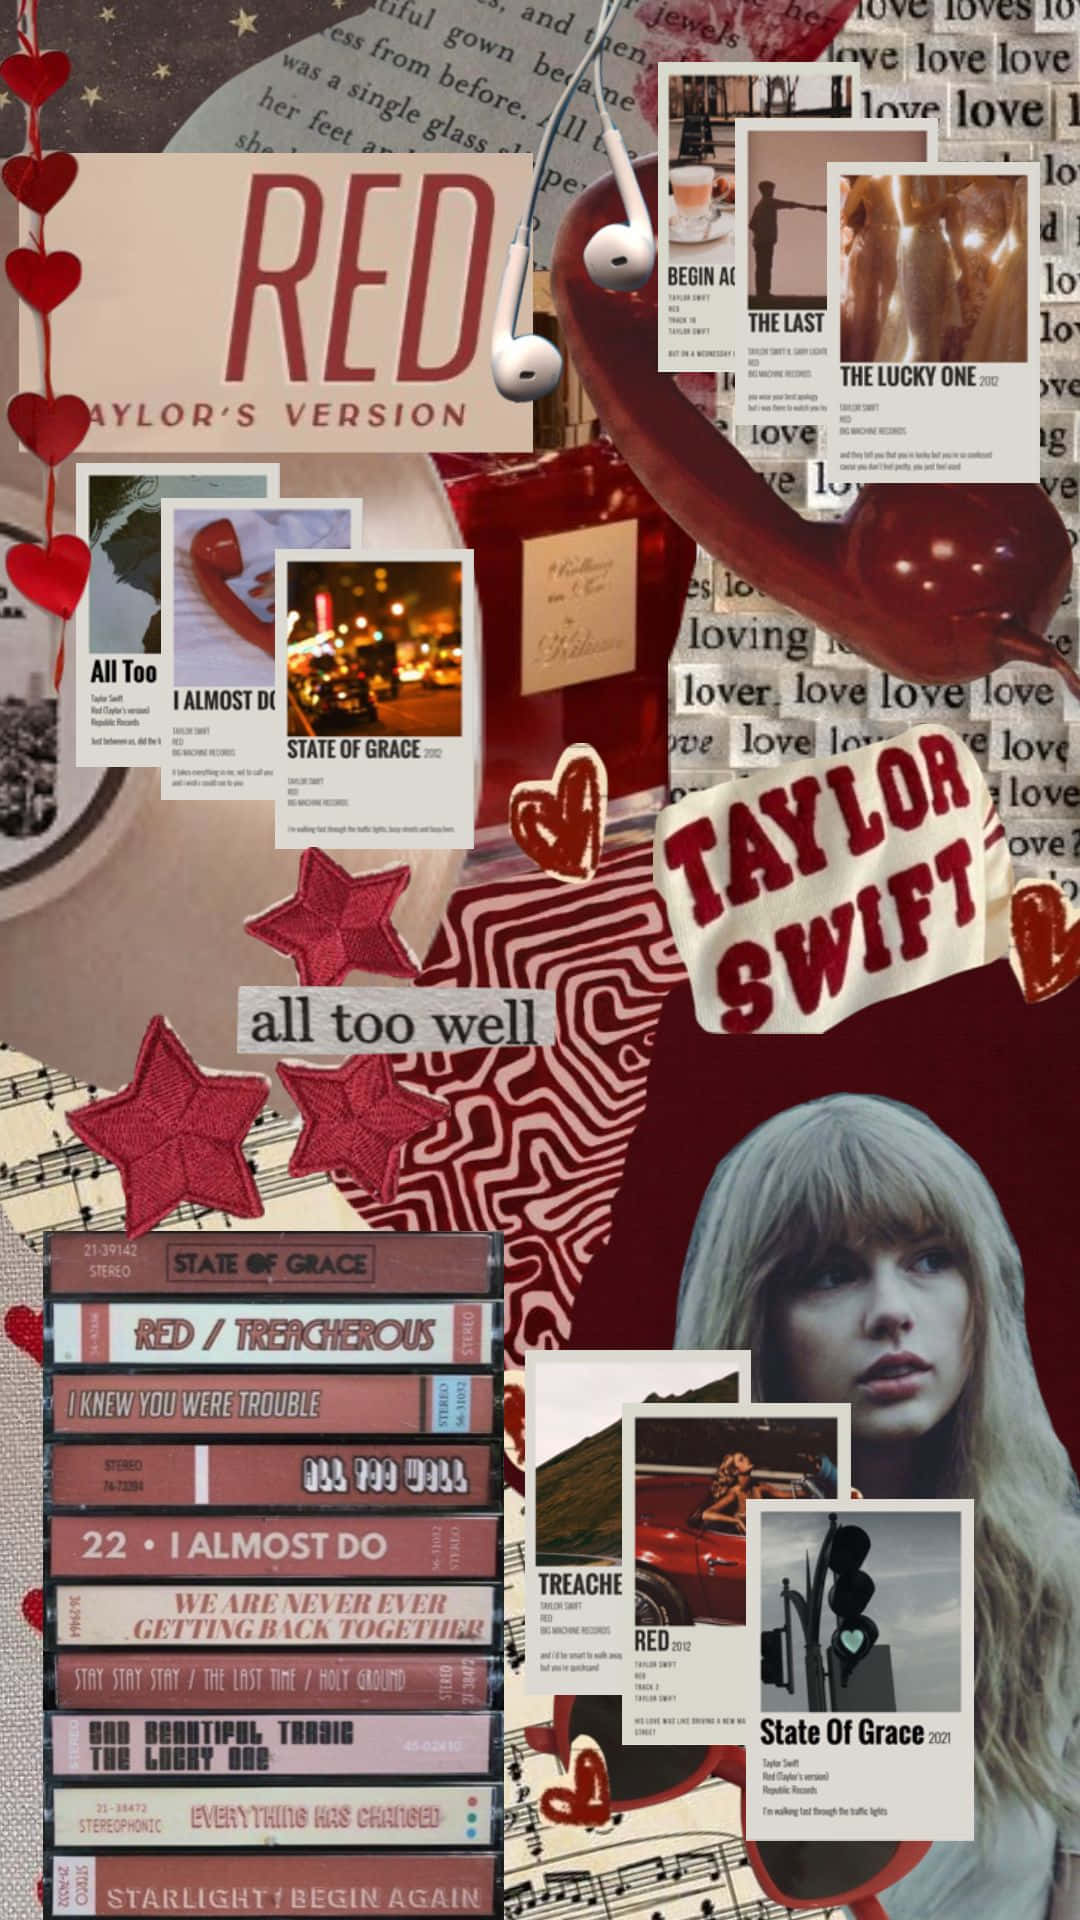 Taylor Swift Red Aesthetic Collage Wallpaper